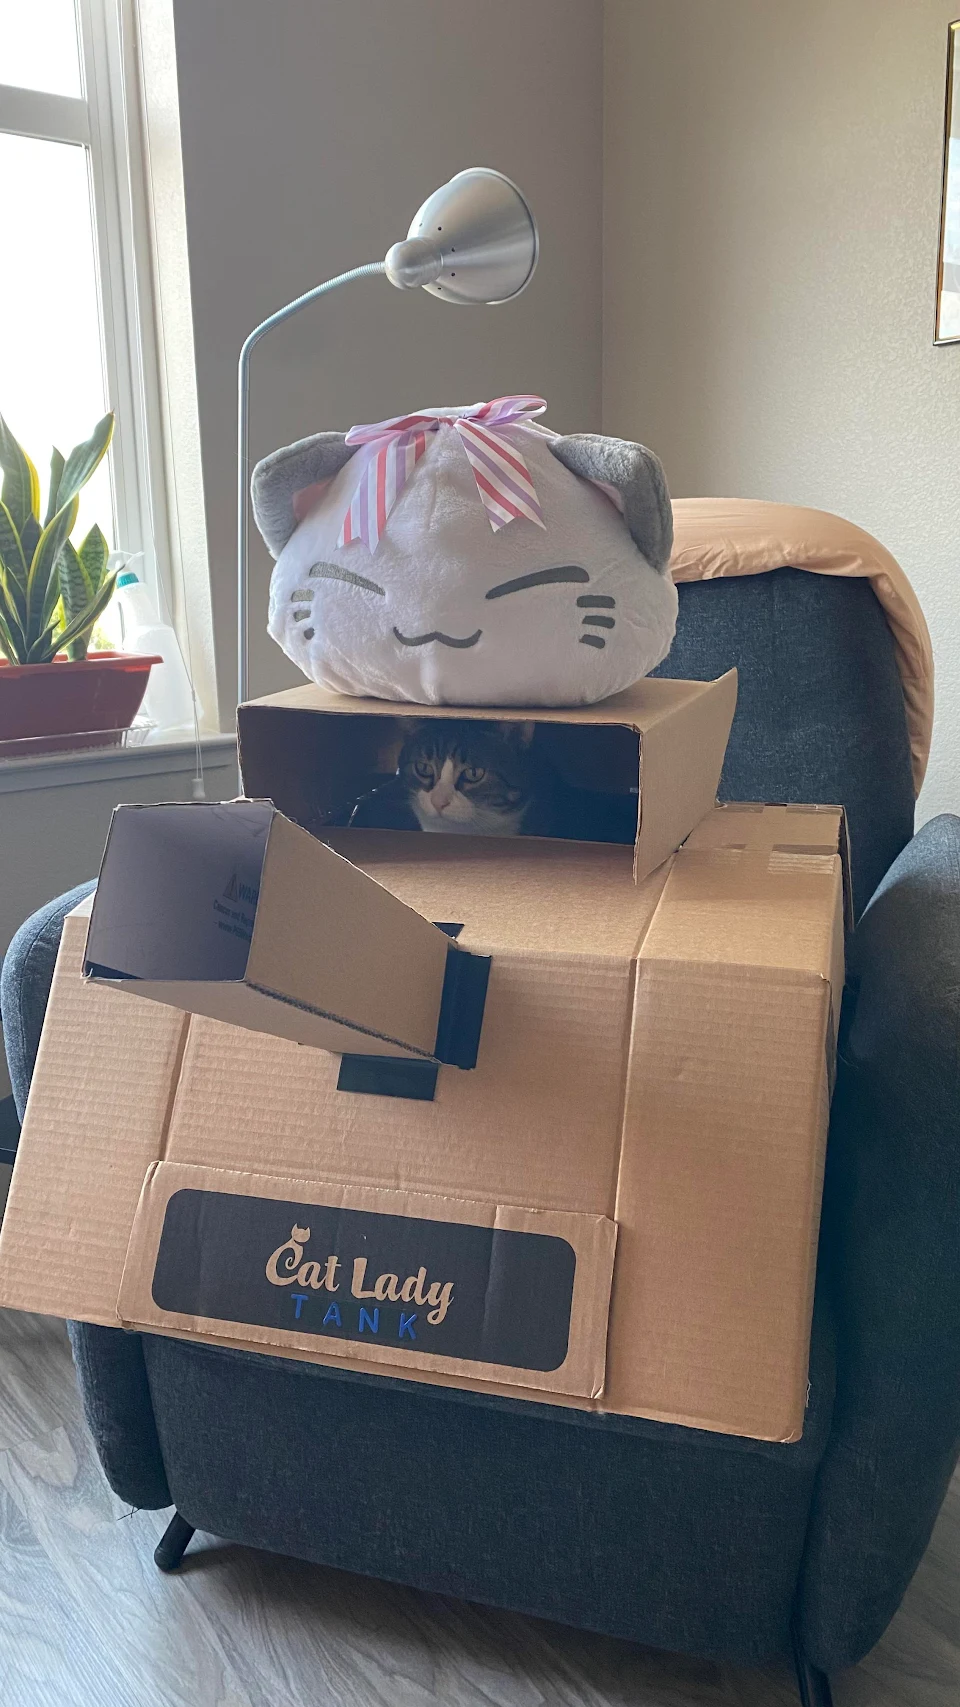 Made a tank for my cat